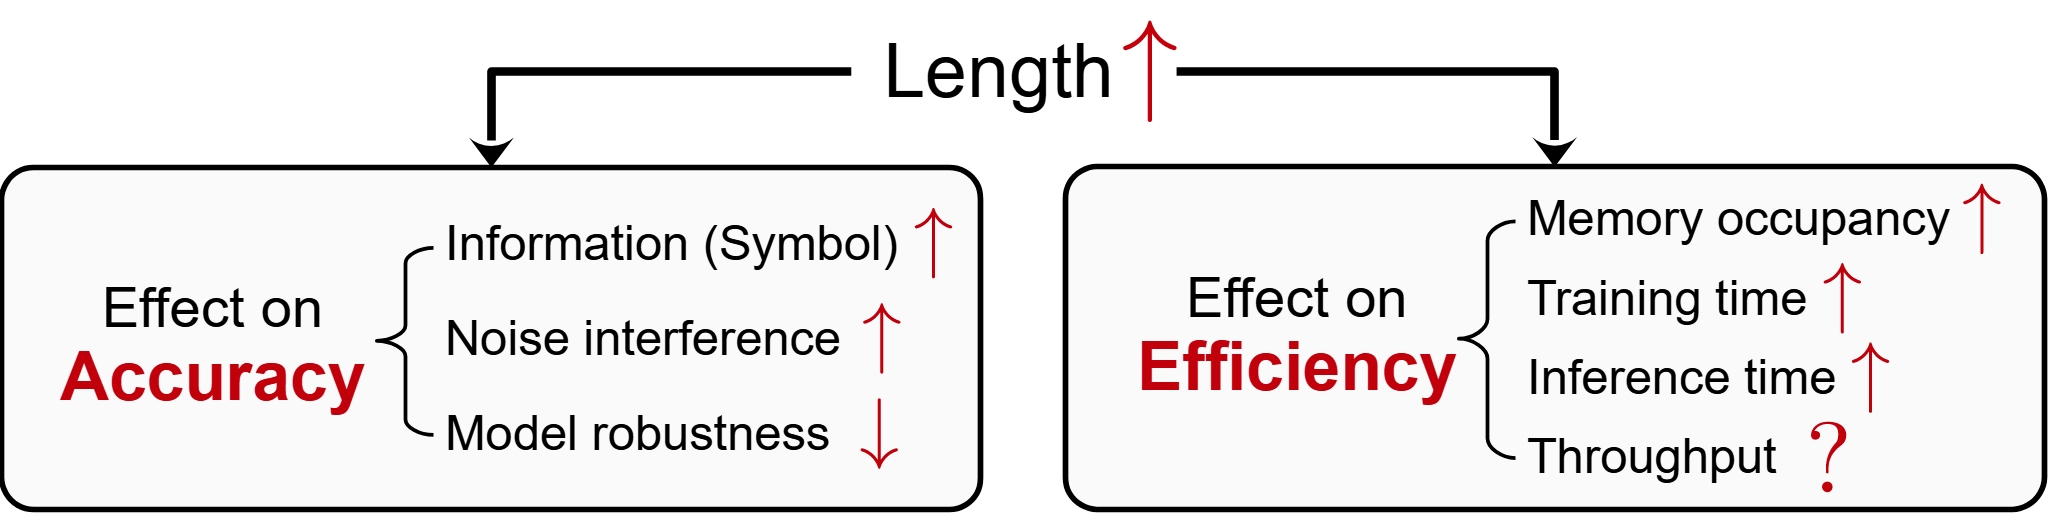 Length effects